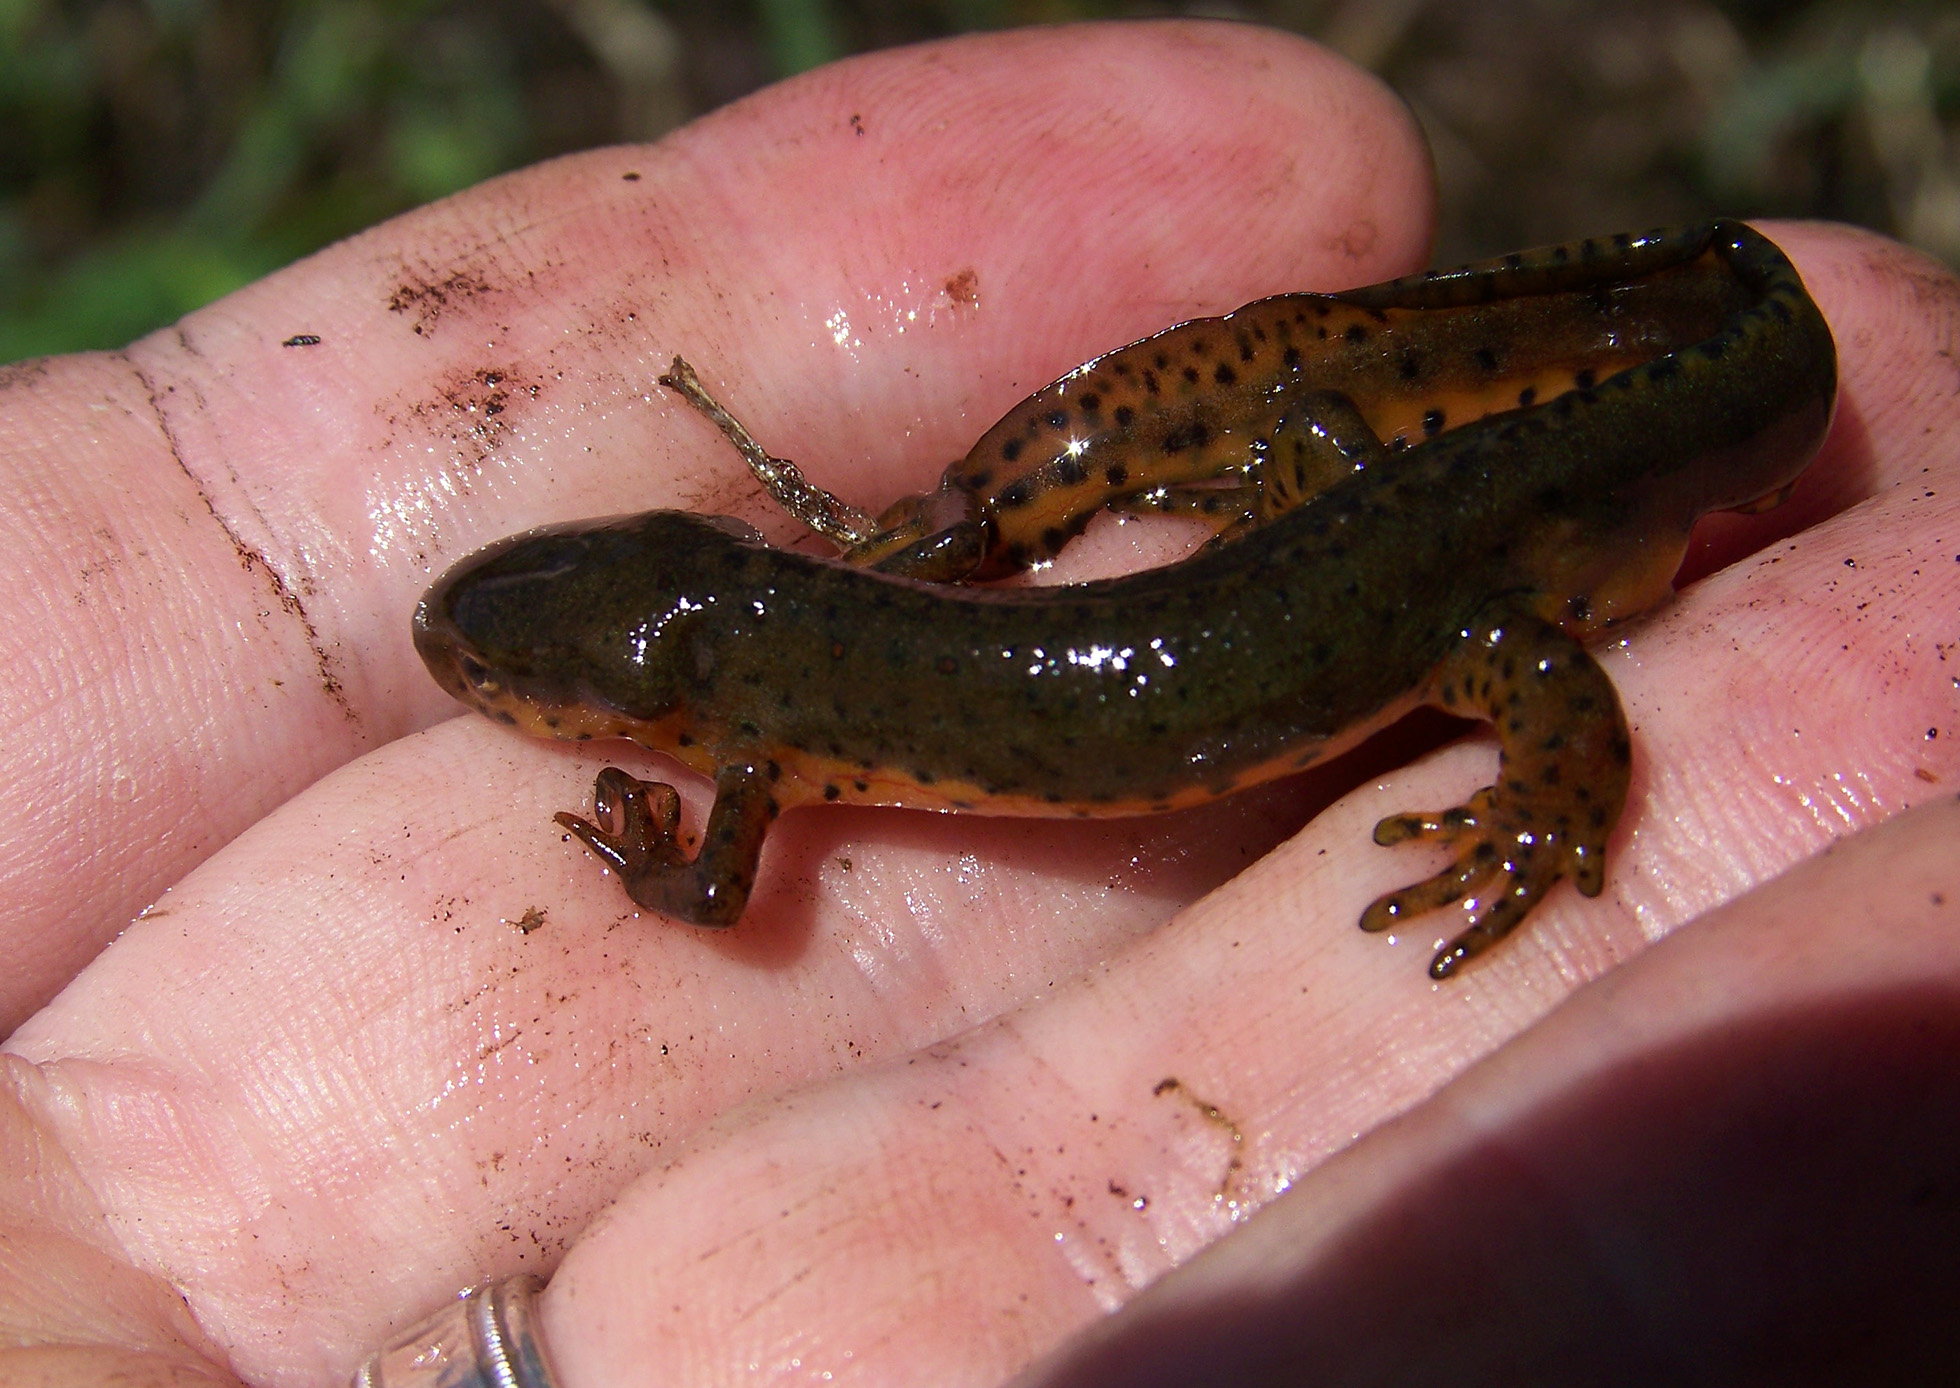 Small salamander in the palm of someone's hand